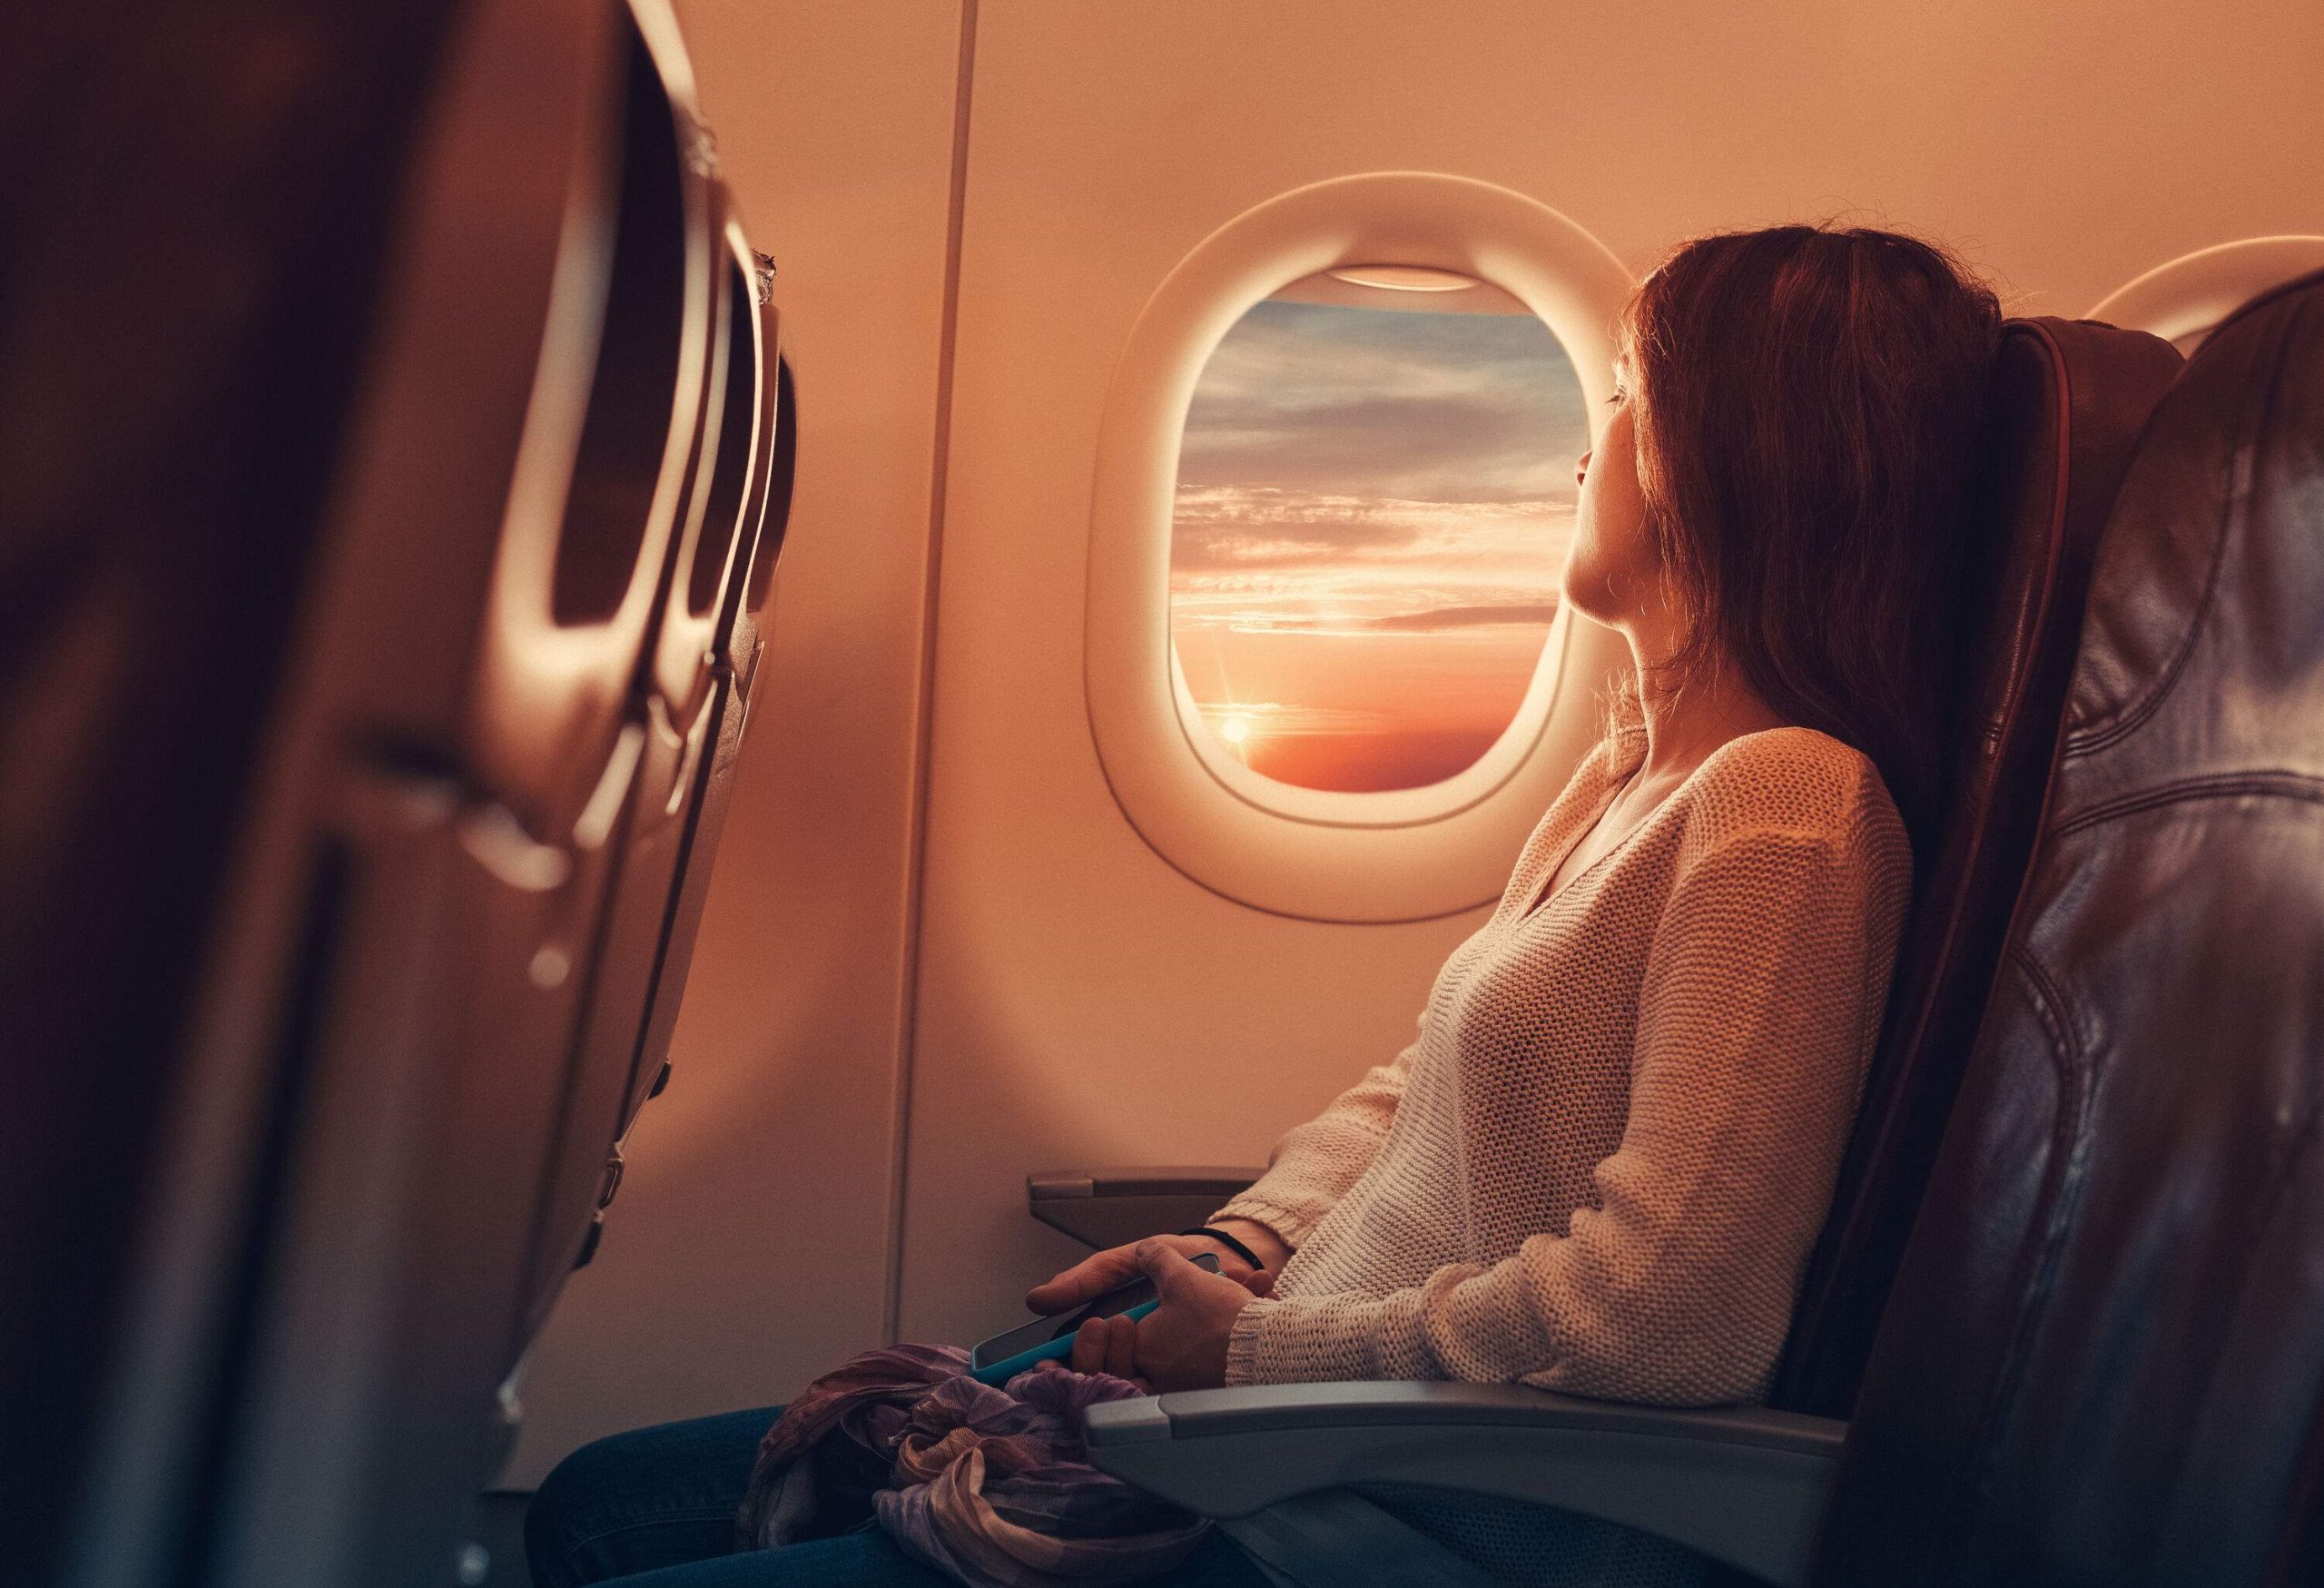 A woman in an airplane gazes through the window, her eyes captivated by the sight of fluffy clouds outside.